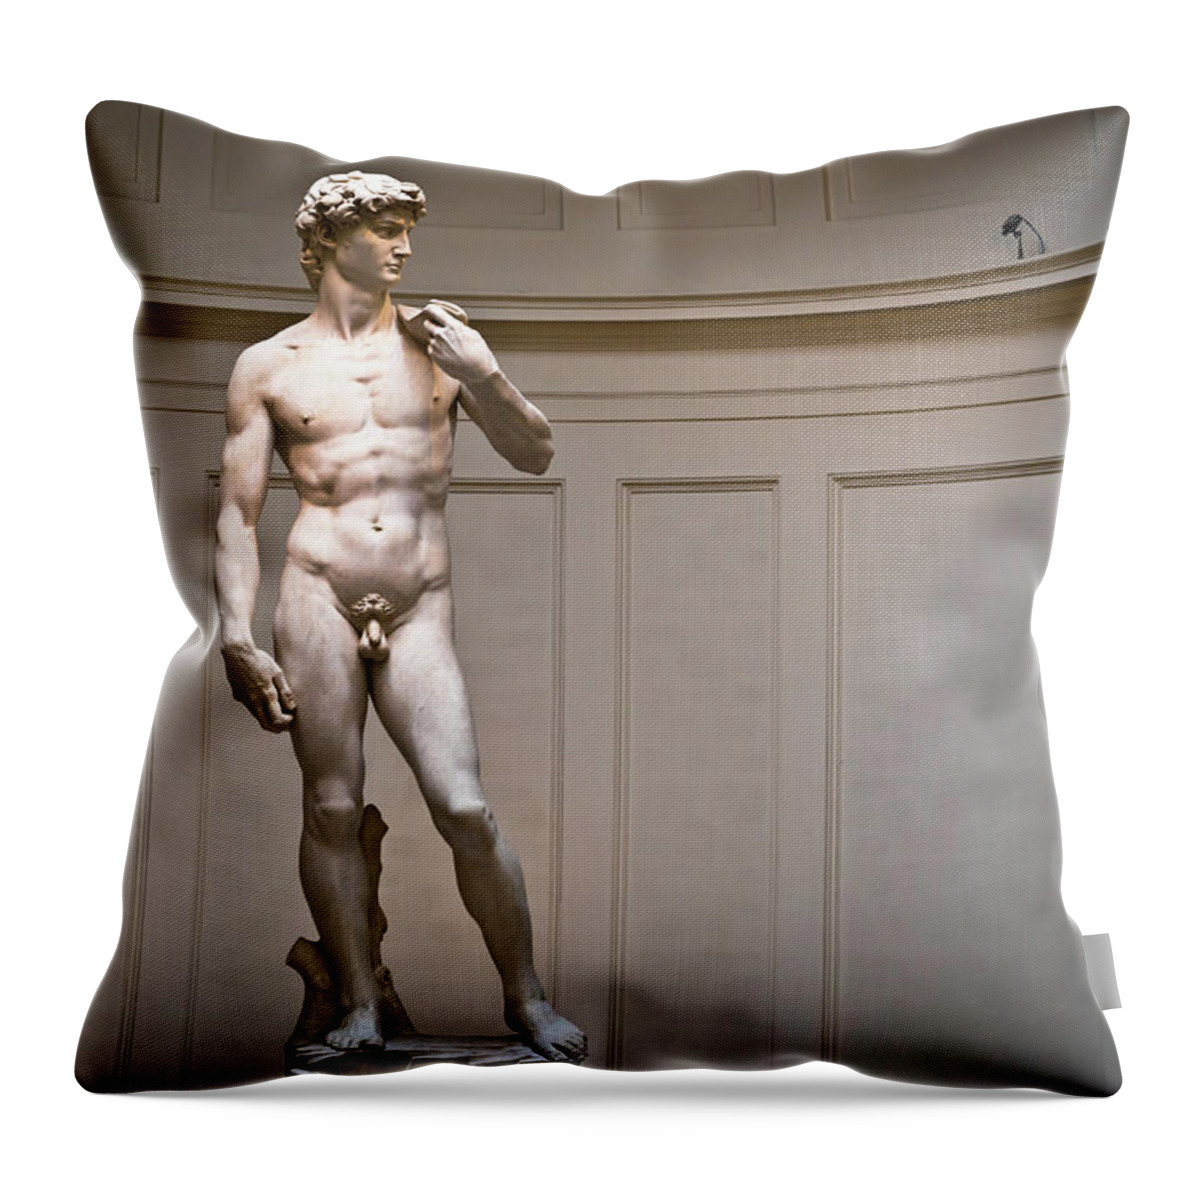 Sculpture Throw Pillow featuring the photograph David sculpture by Michelangelo wordls most famous statue by Brch Photography